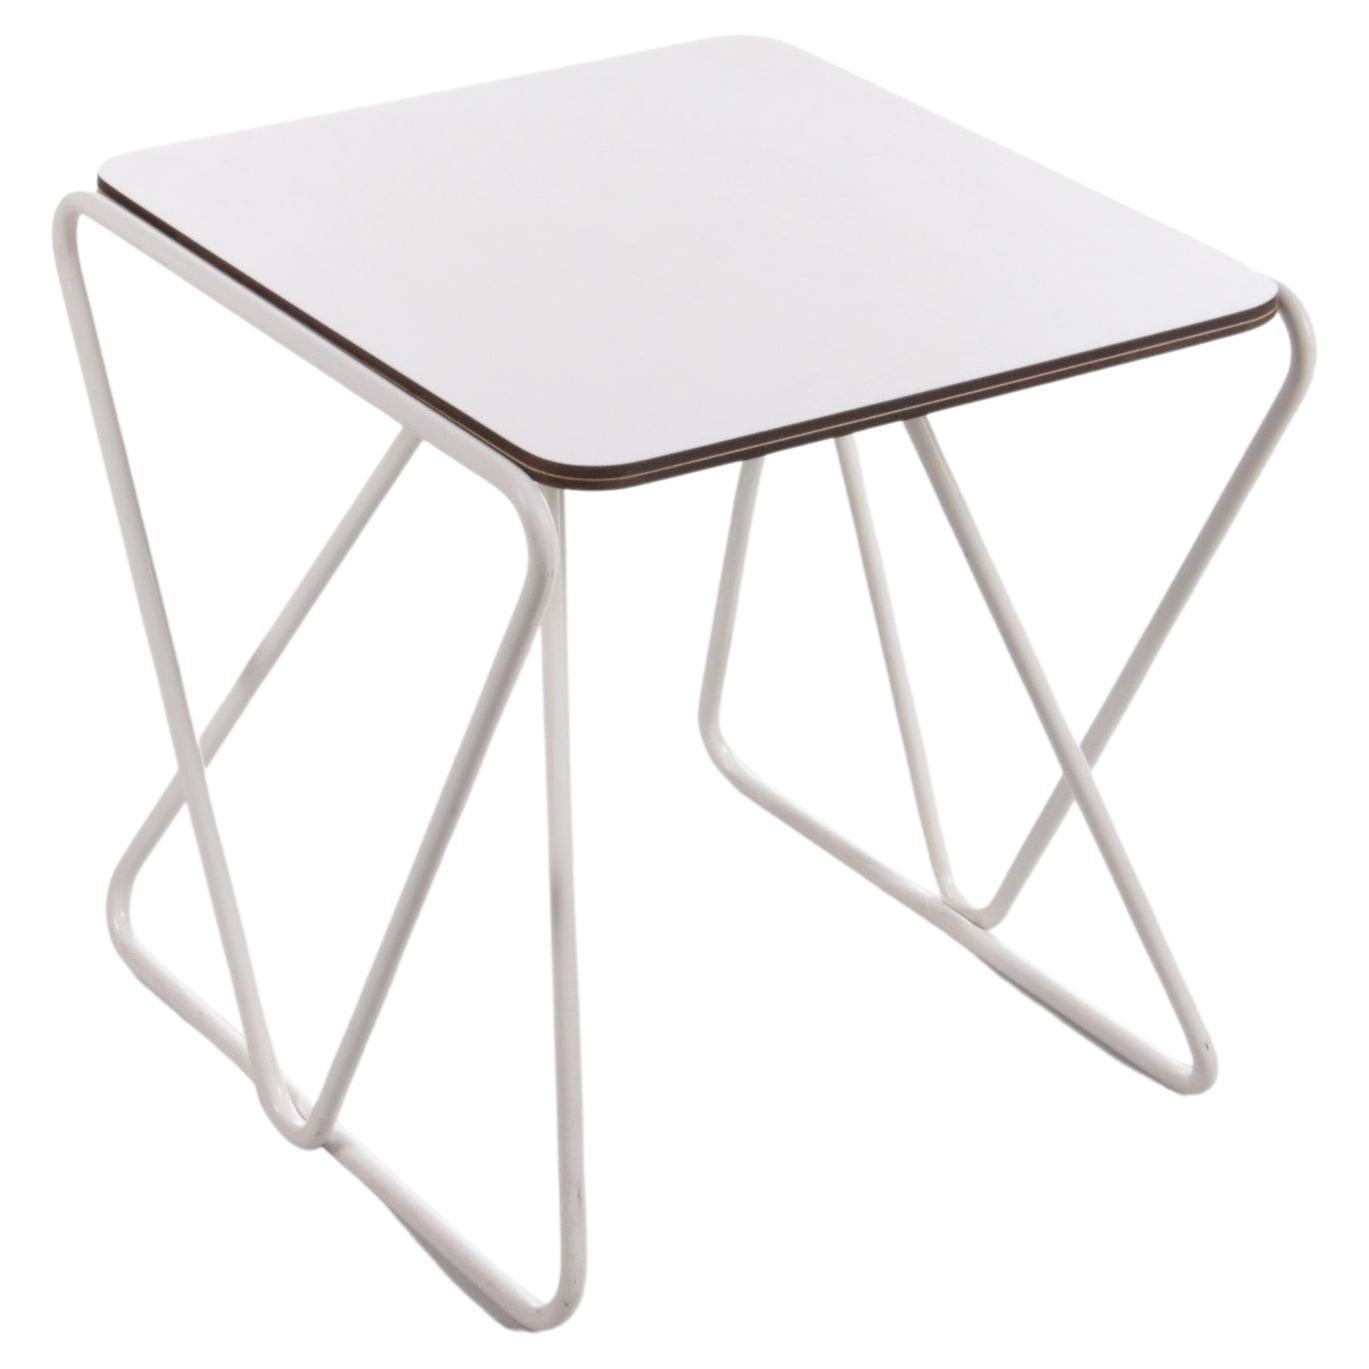 Table d'appoint Walter Antonis pour I-Form Holland, 1978